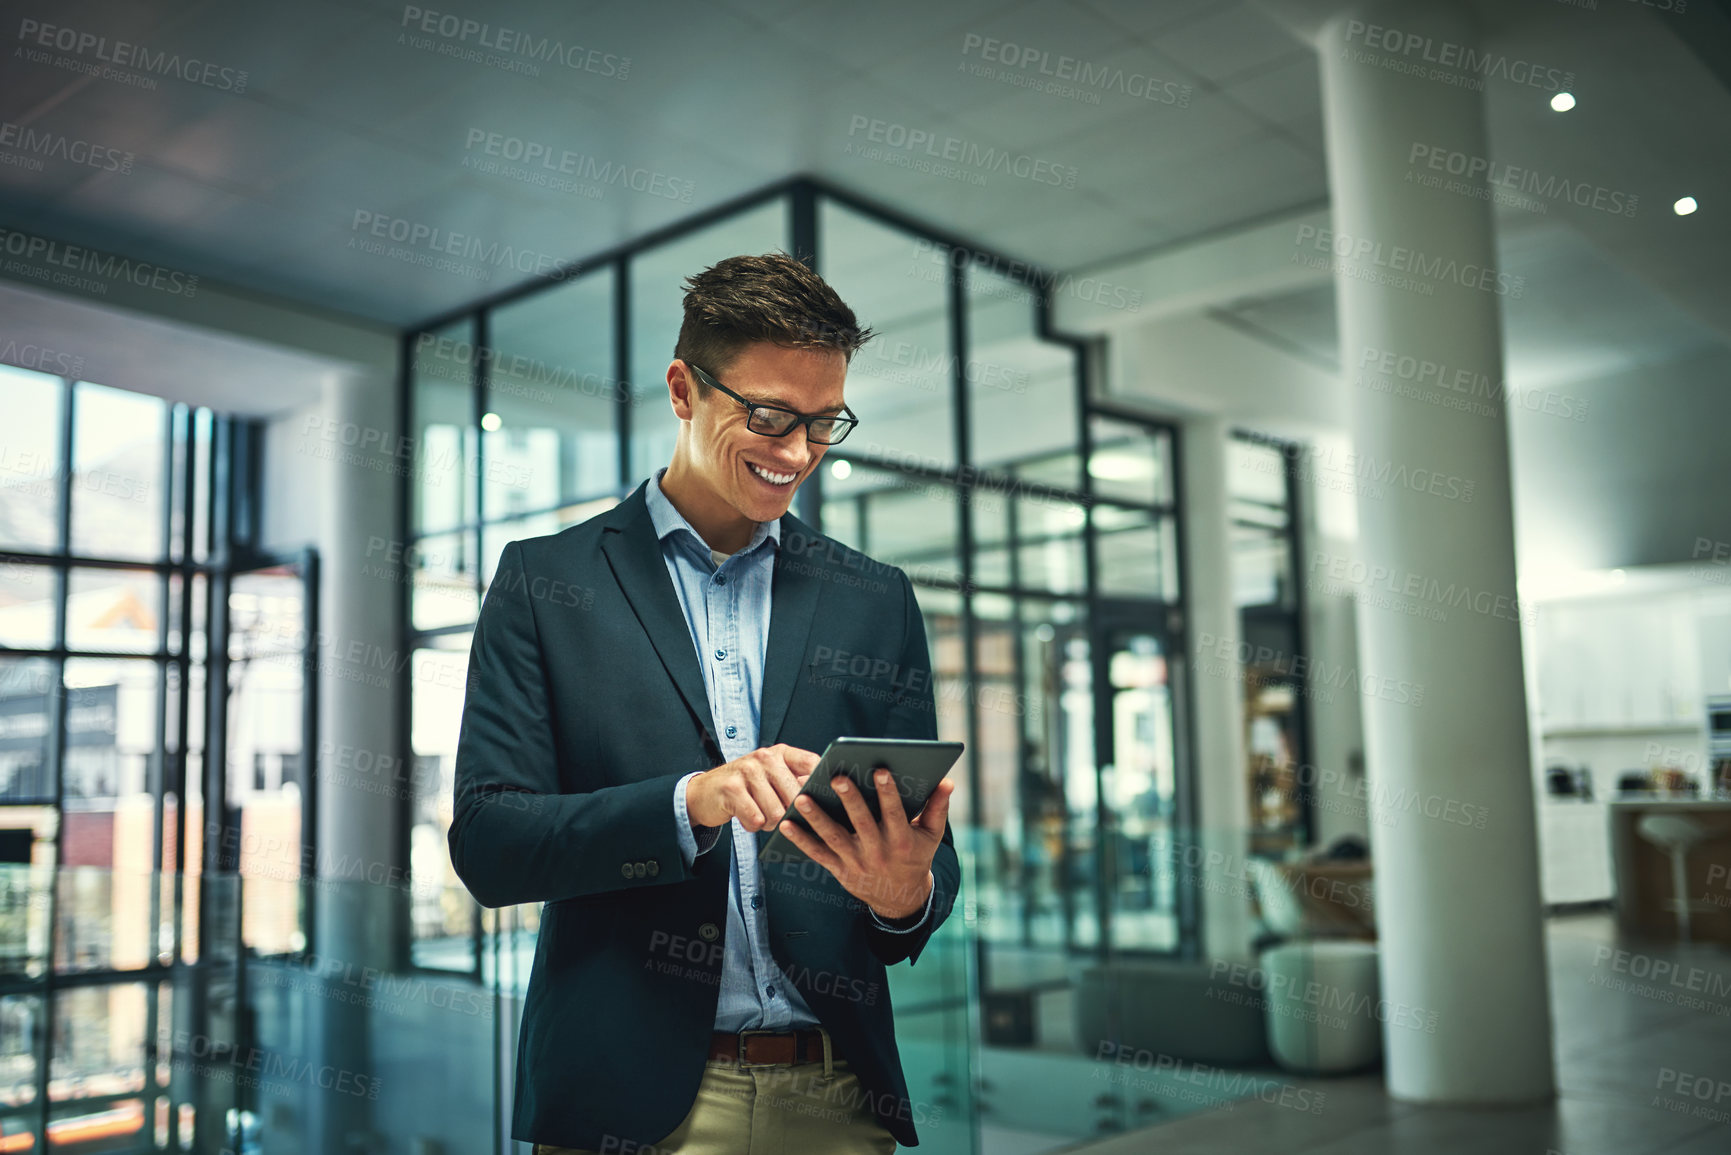 Buy stock photo Shot of a young businessman using a digital tablet in an office